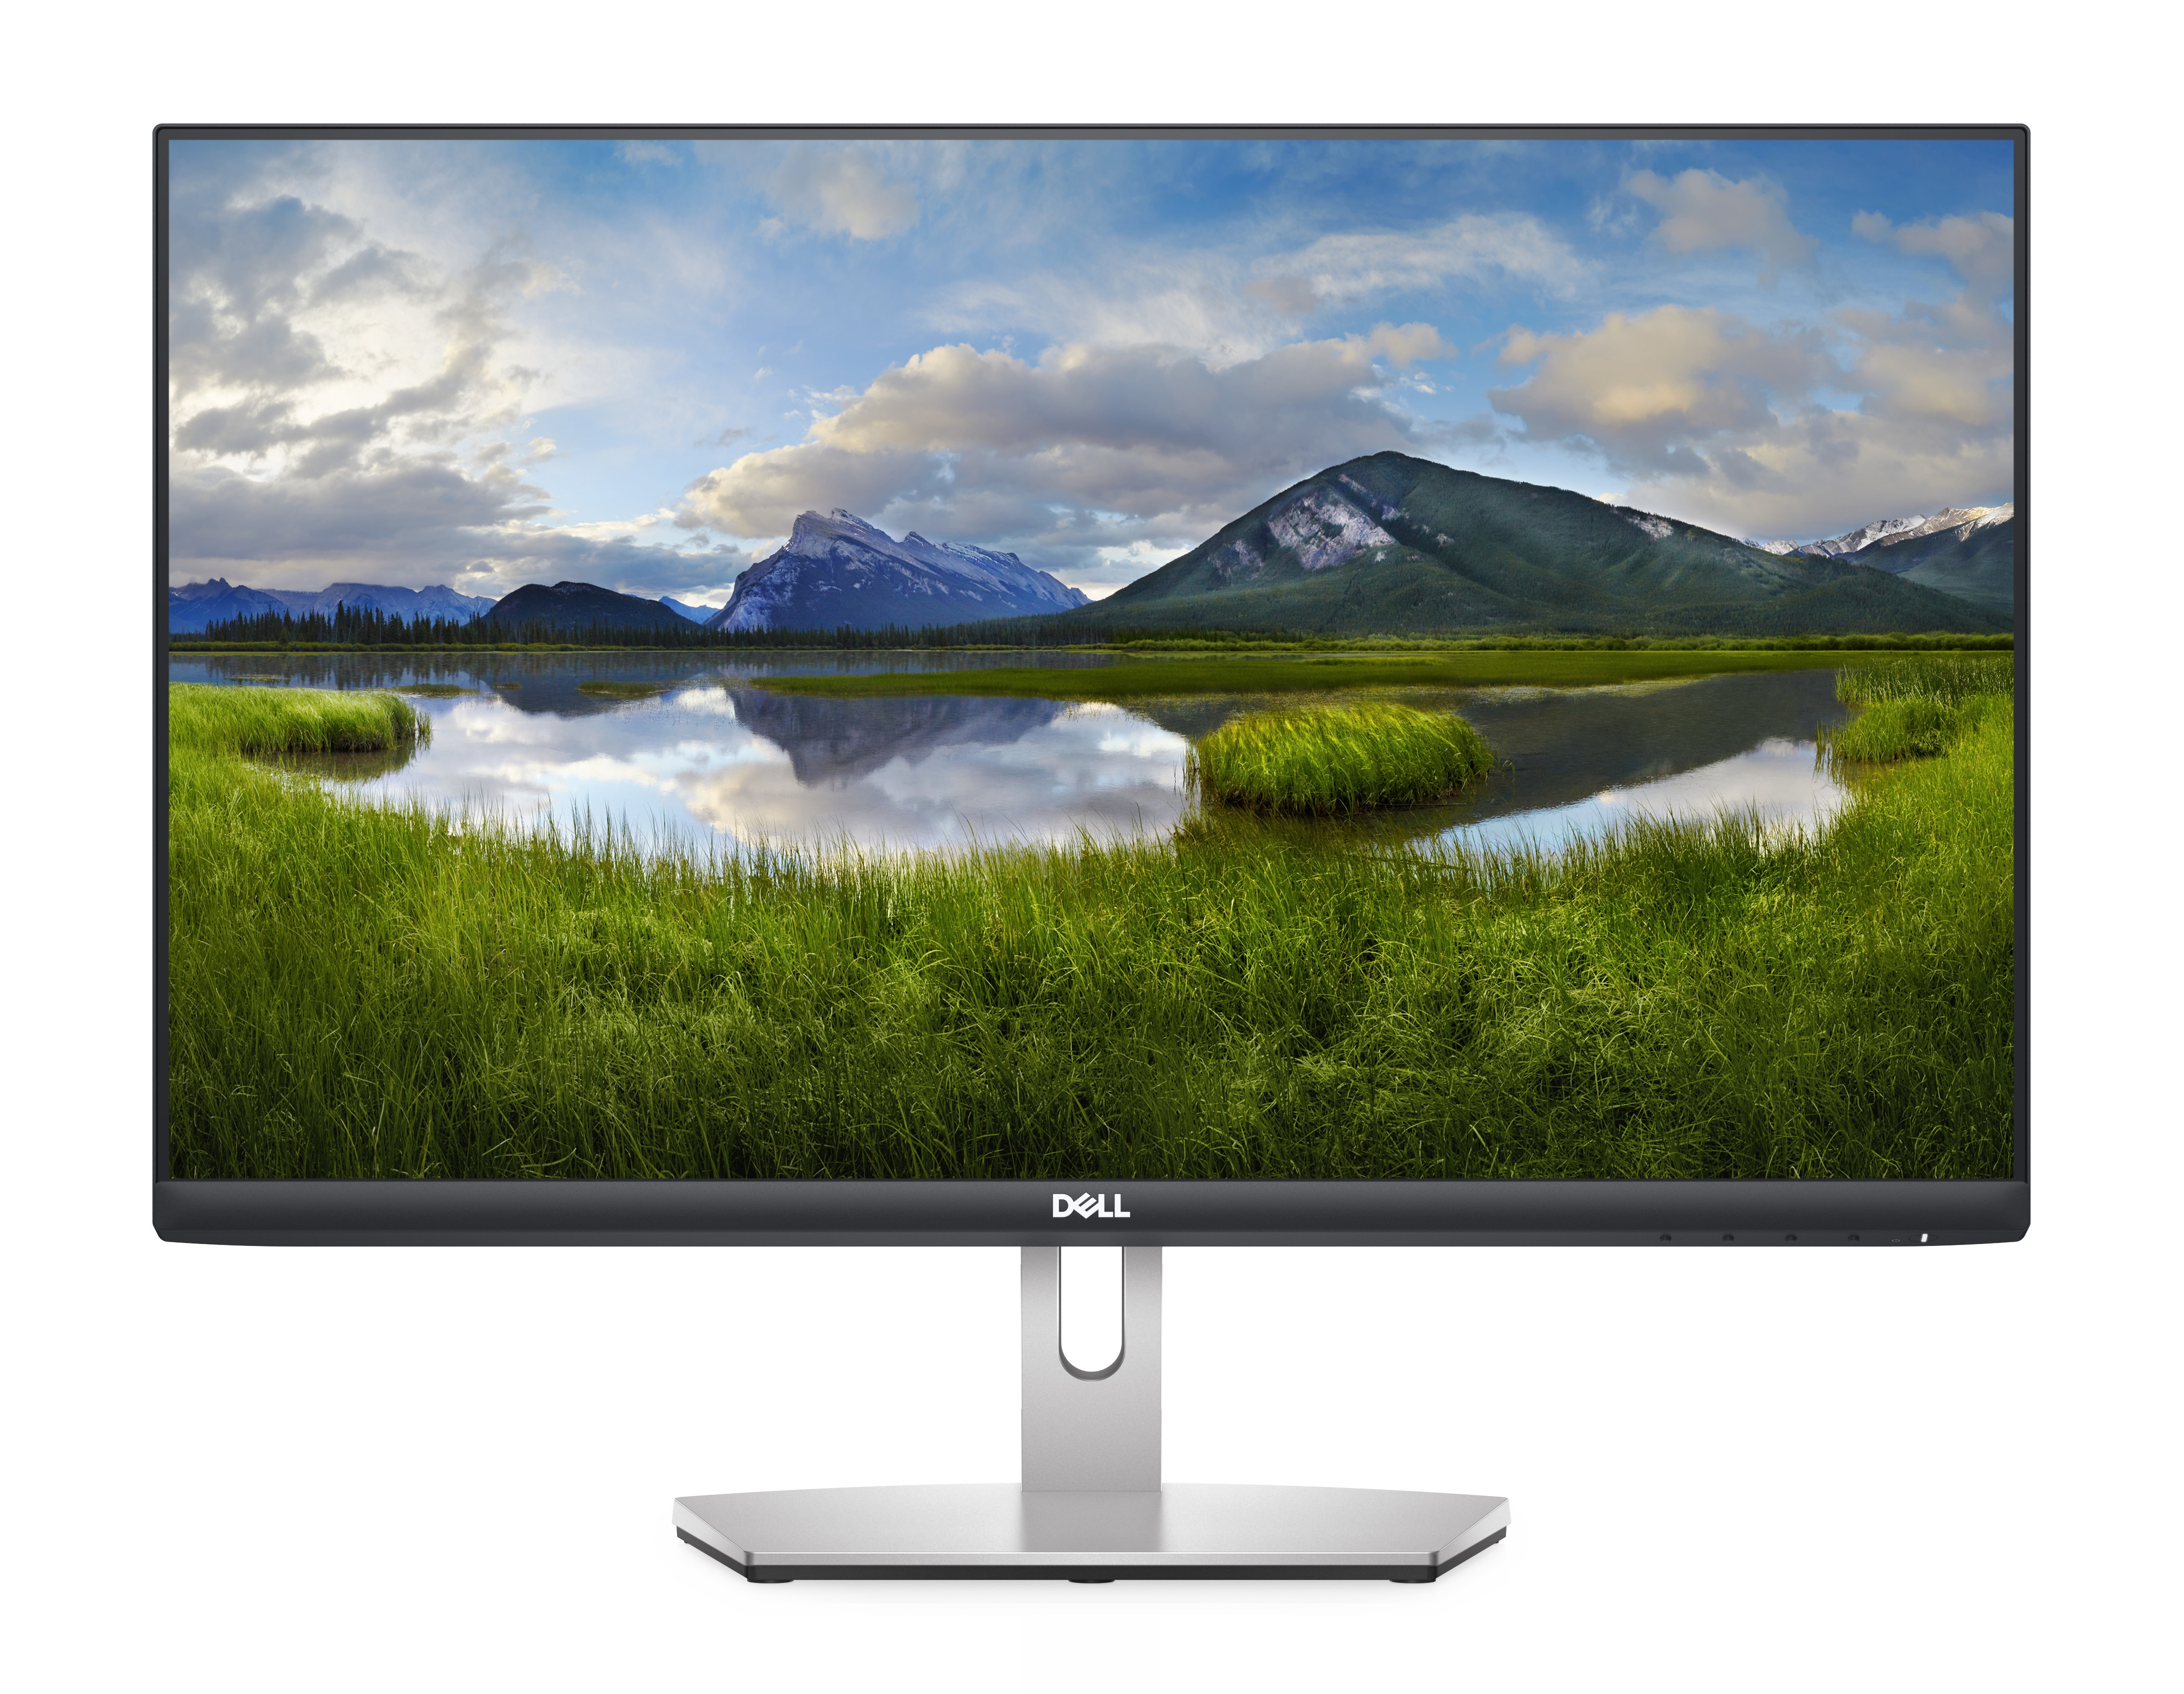 DELL S Series S2421H LED display